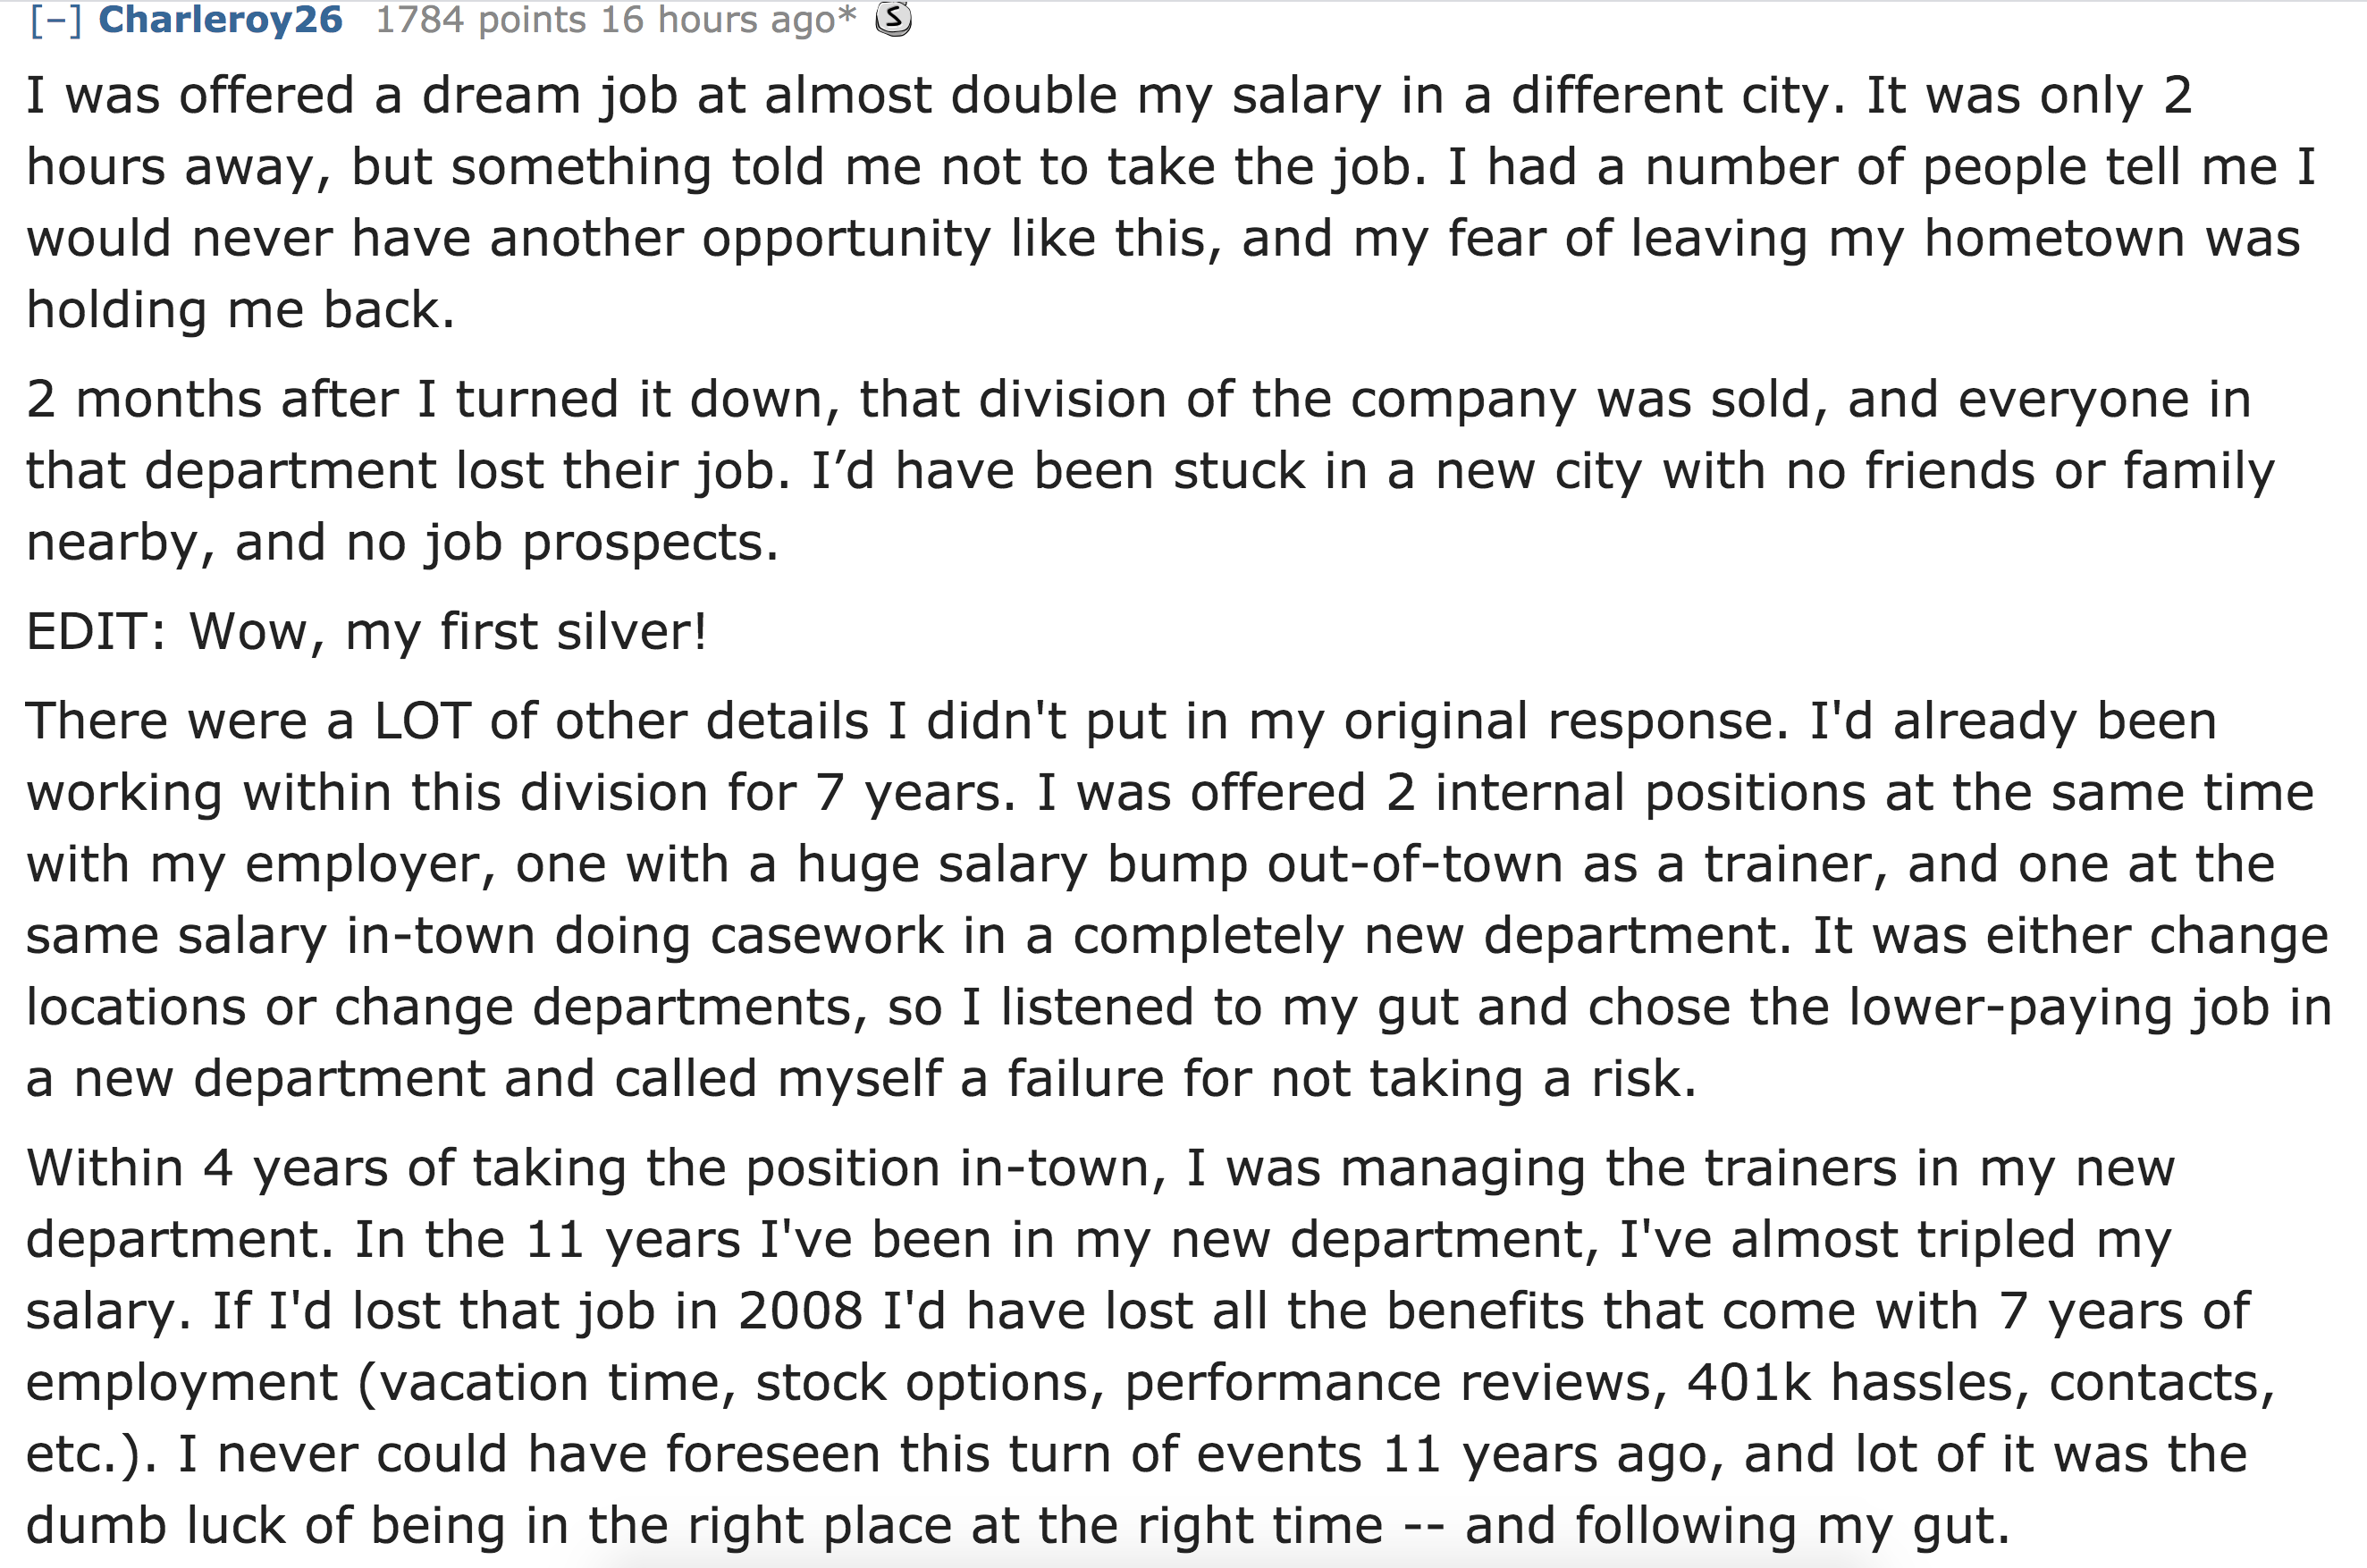 document - Charleroy26 1784 points 16 hours ago s I was offered a dream job at almost double my salary in a different city. It was only 2 hours away, but something told me not to take the job. I had a number of people tell me I would never have another op